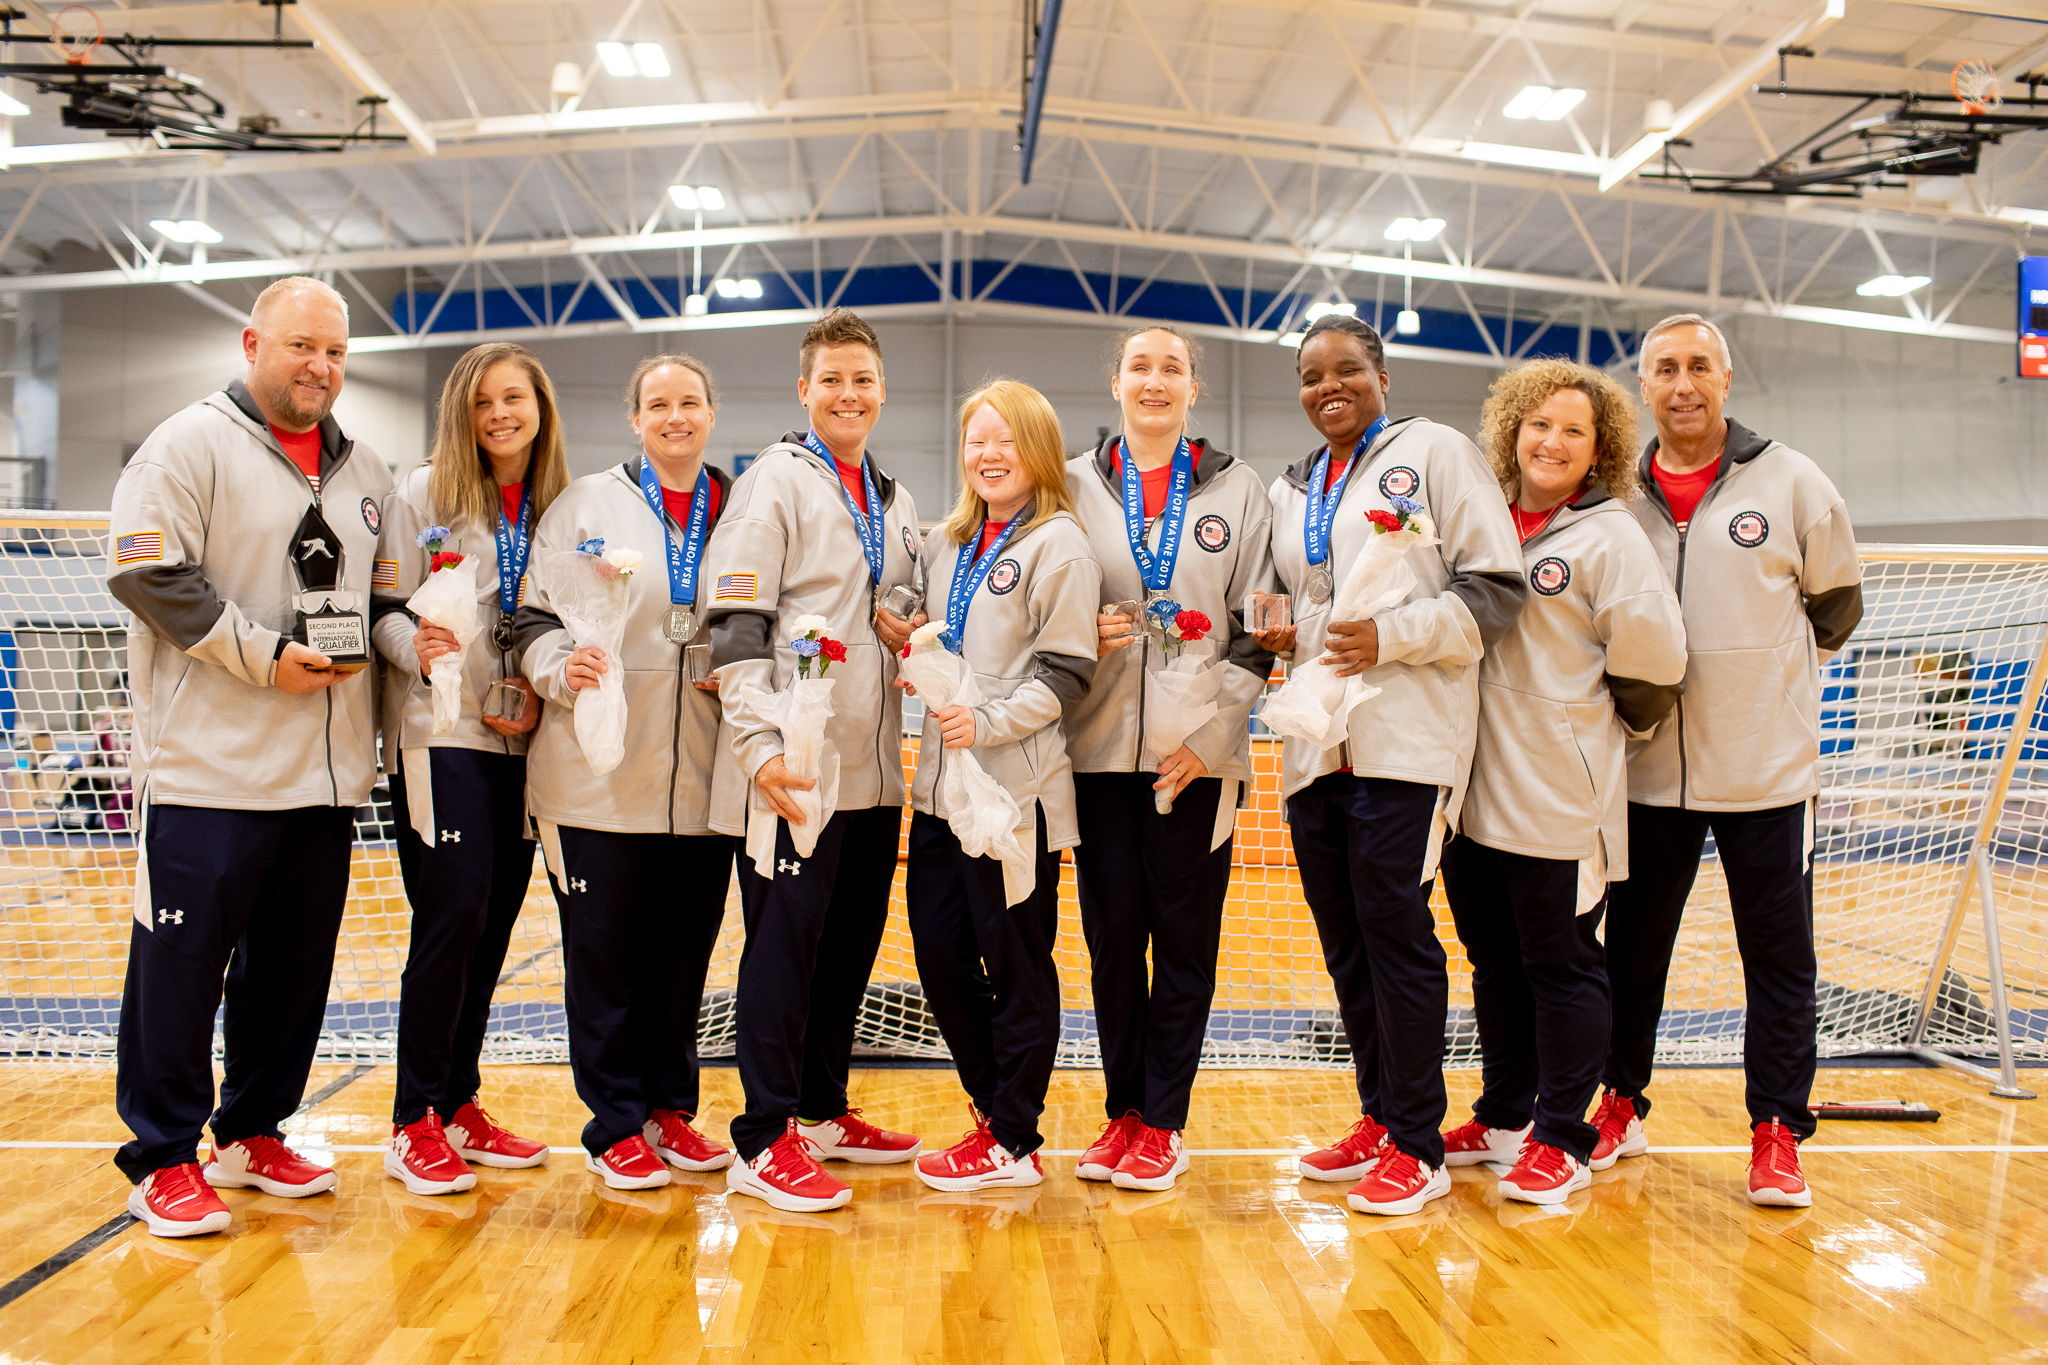 With Semifinal Win In Qualifier U S Women S Goalball Team Earns Paralympic Quota Spot United States Association Of Blind Athletes